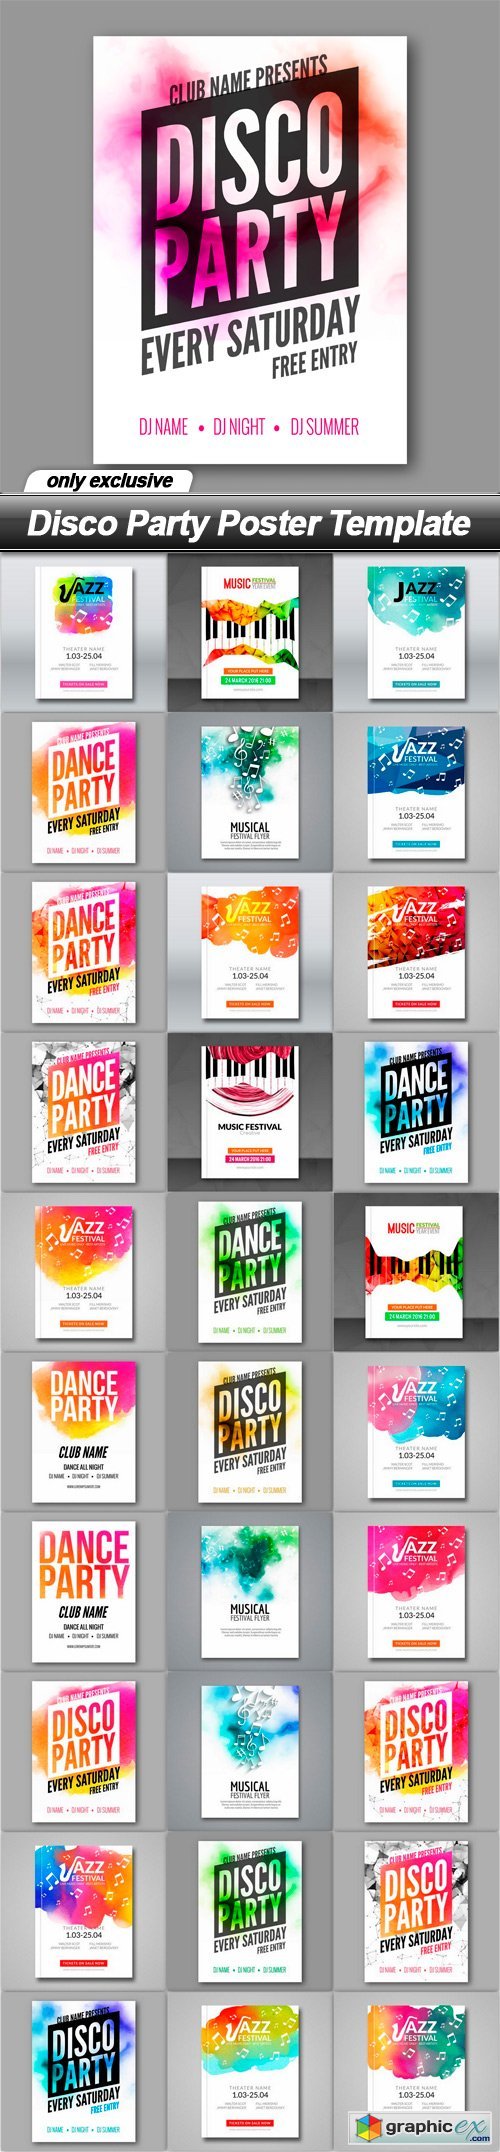 Disco Party Poster Template - 31 EPS